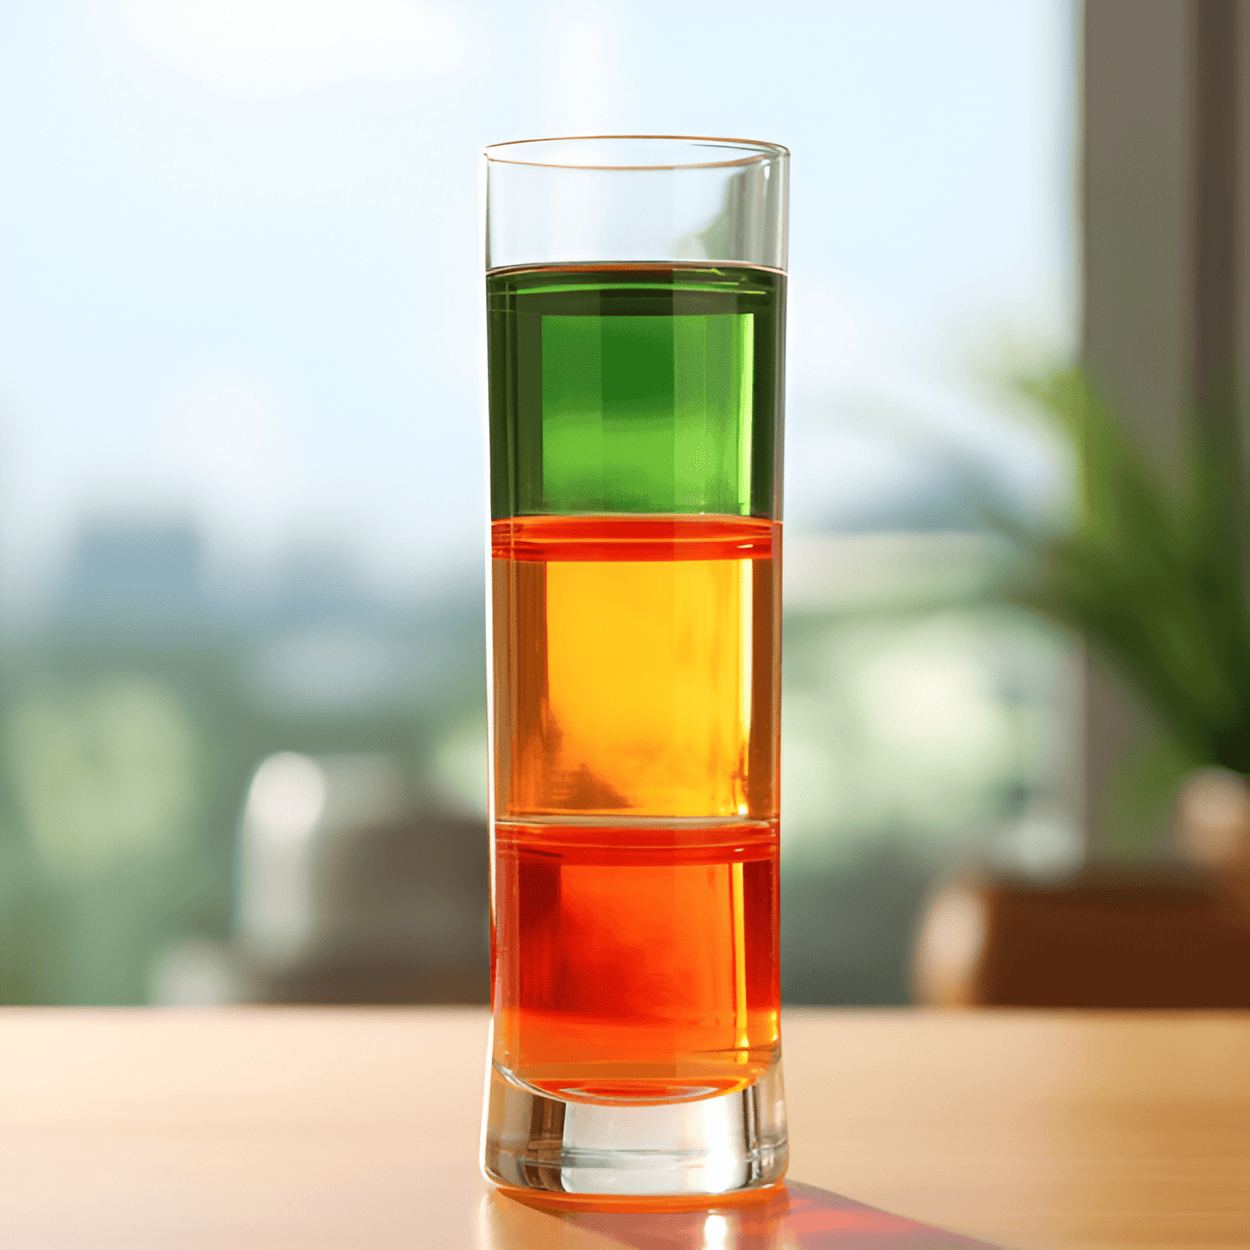 Traffic Light Cocktail Recipe - The Traffic Light cocktail is a sweet, fruity drink with a refreshing aftertaste. The layers of grenadine, orange juice, and Midori create a delightful blend of flavors that is both tangy and sweet.